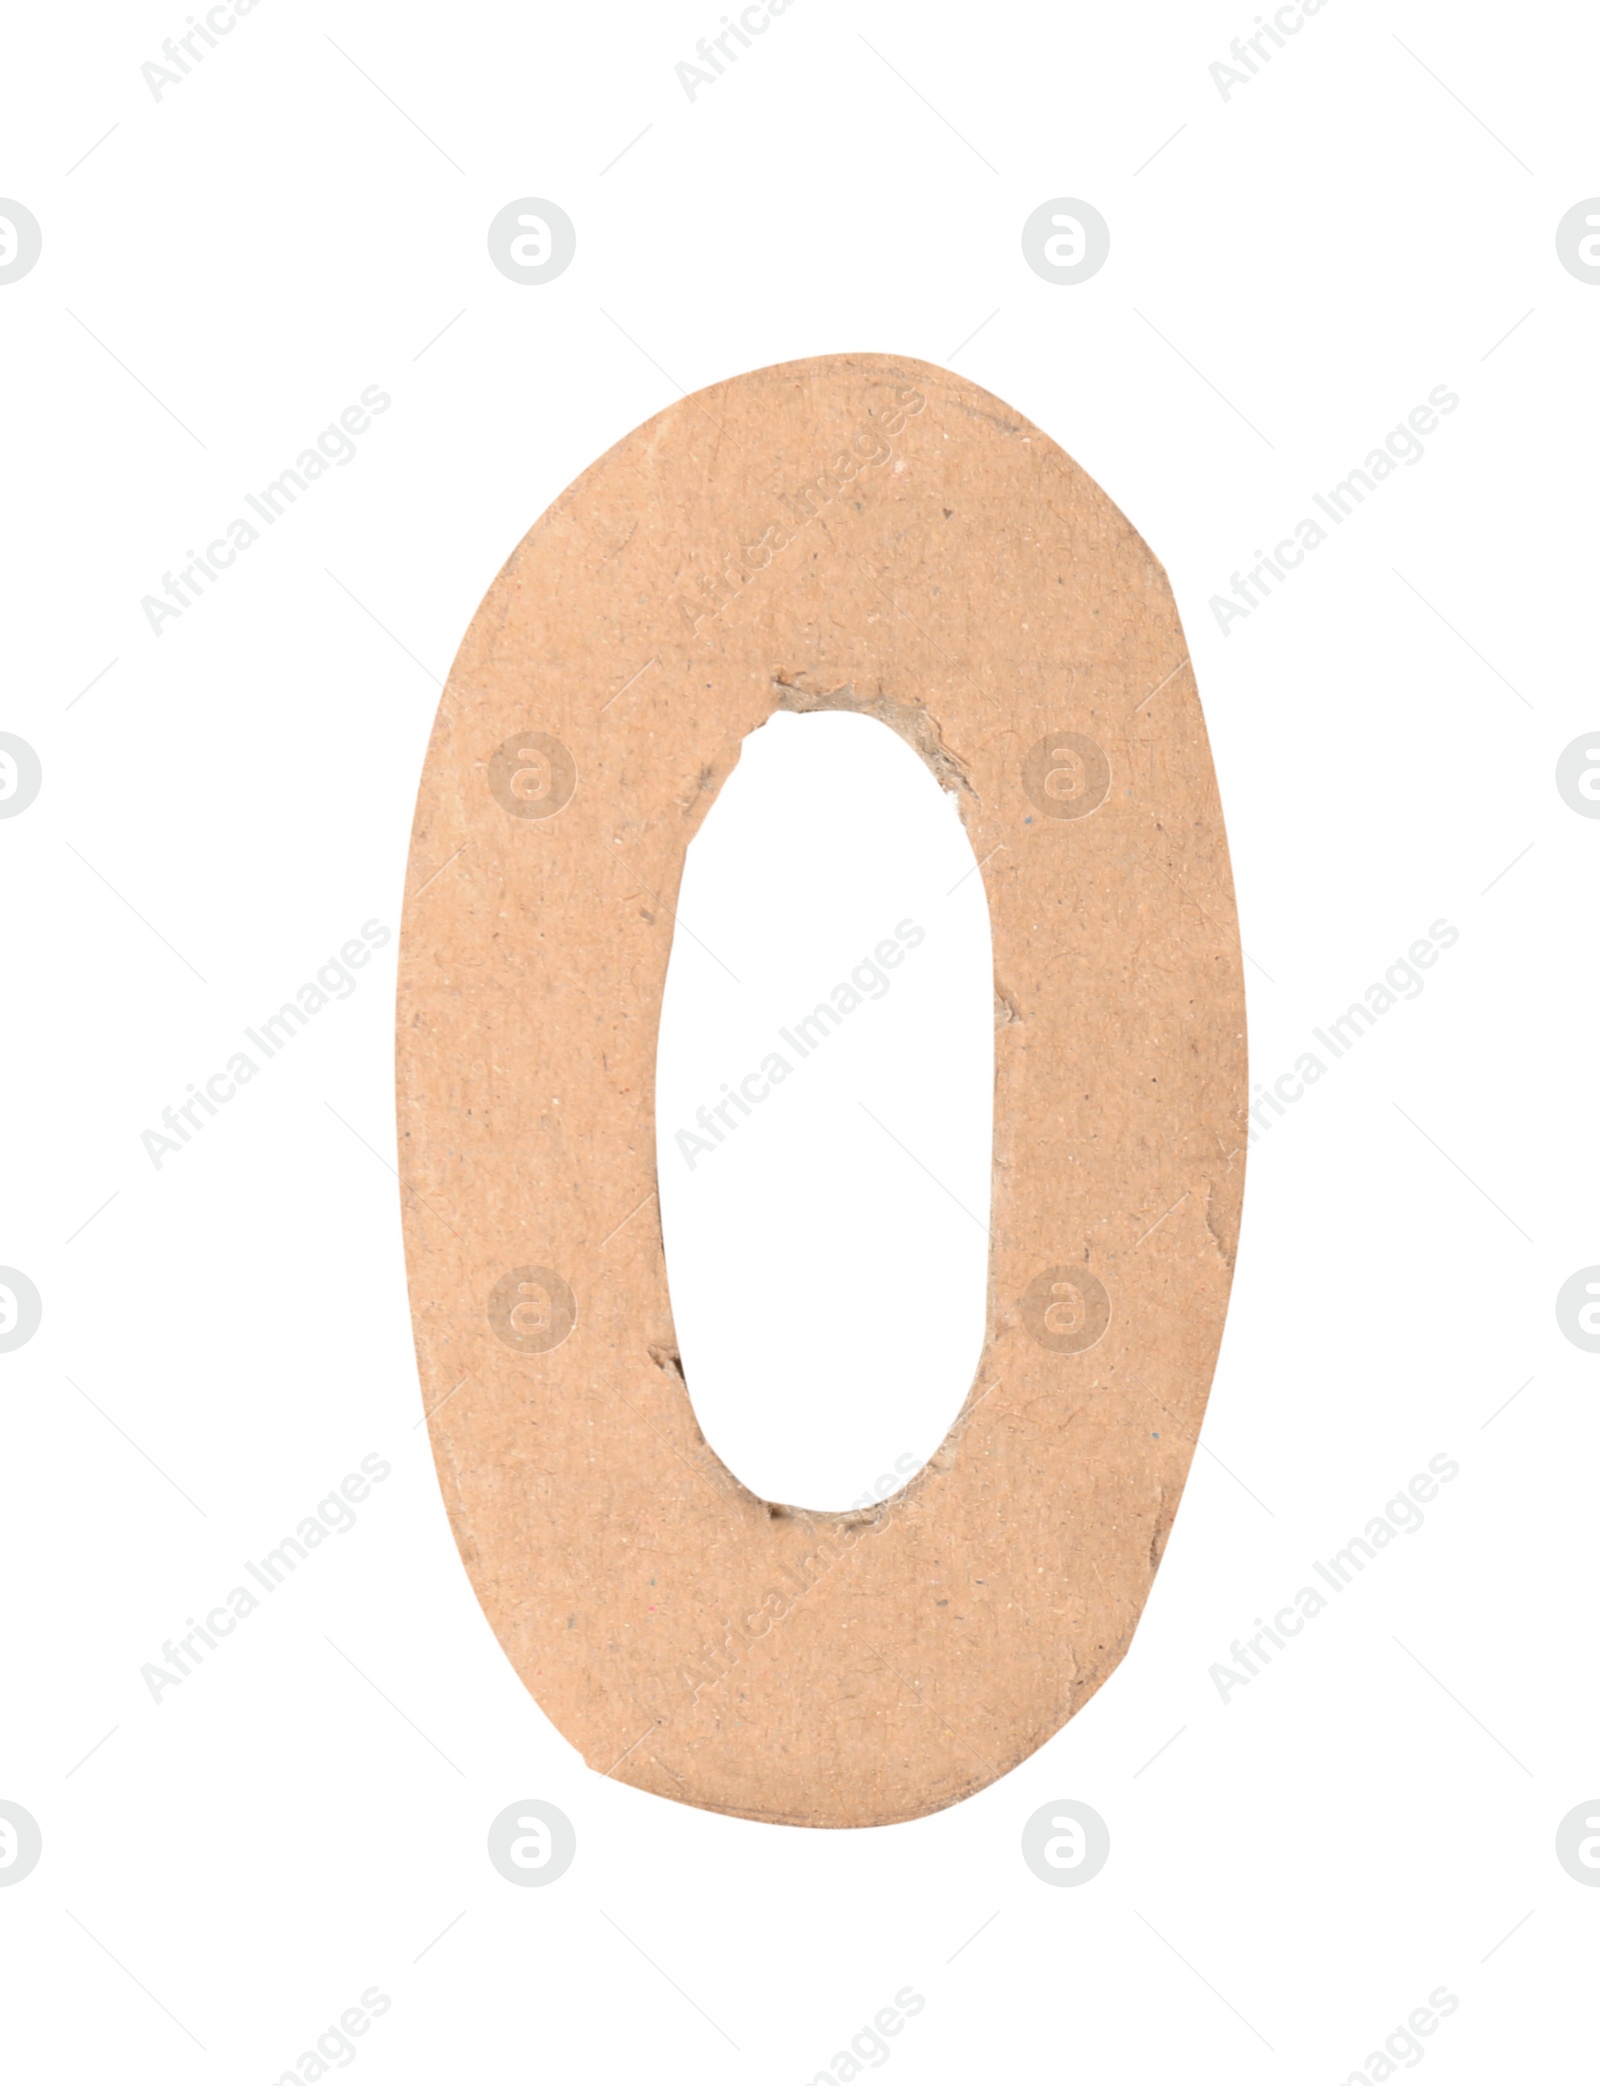 Photo of Number 0 made of brown cardboard on white background